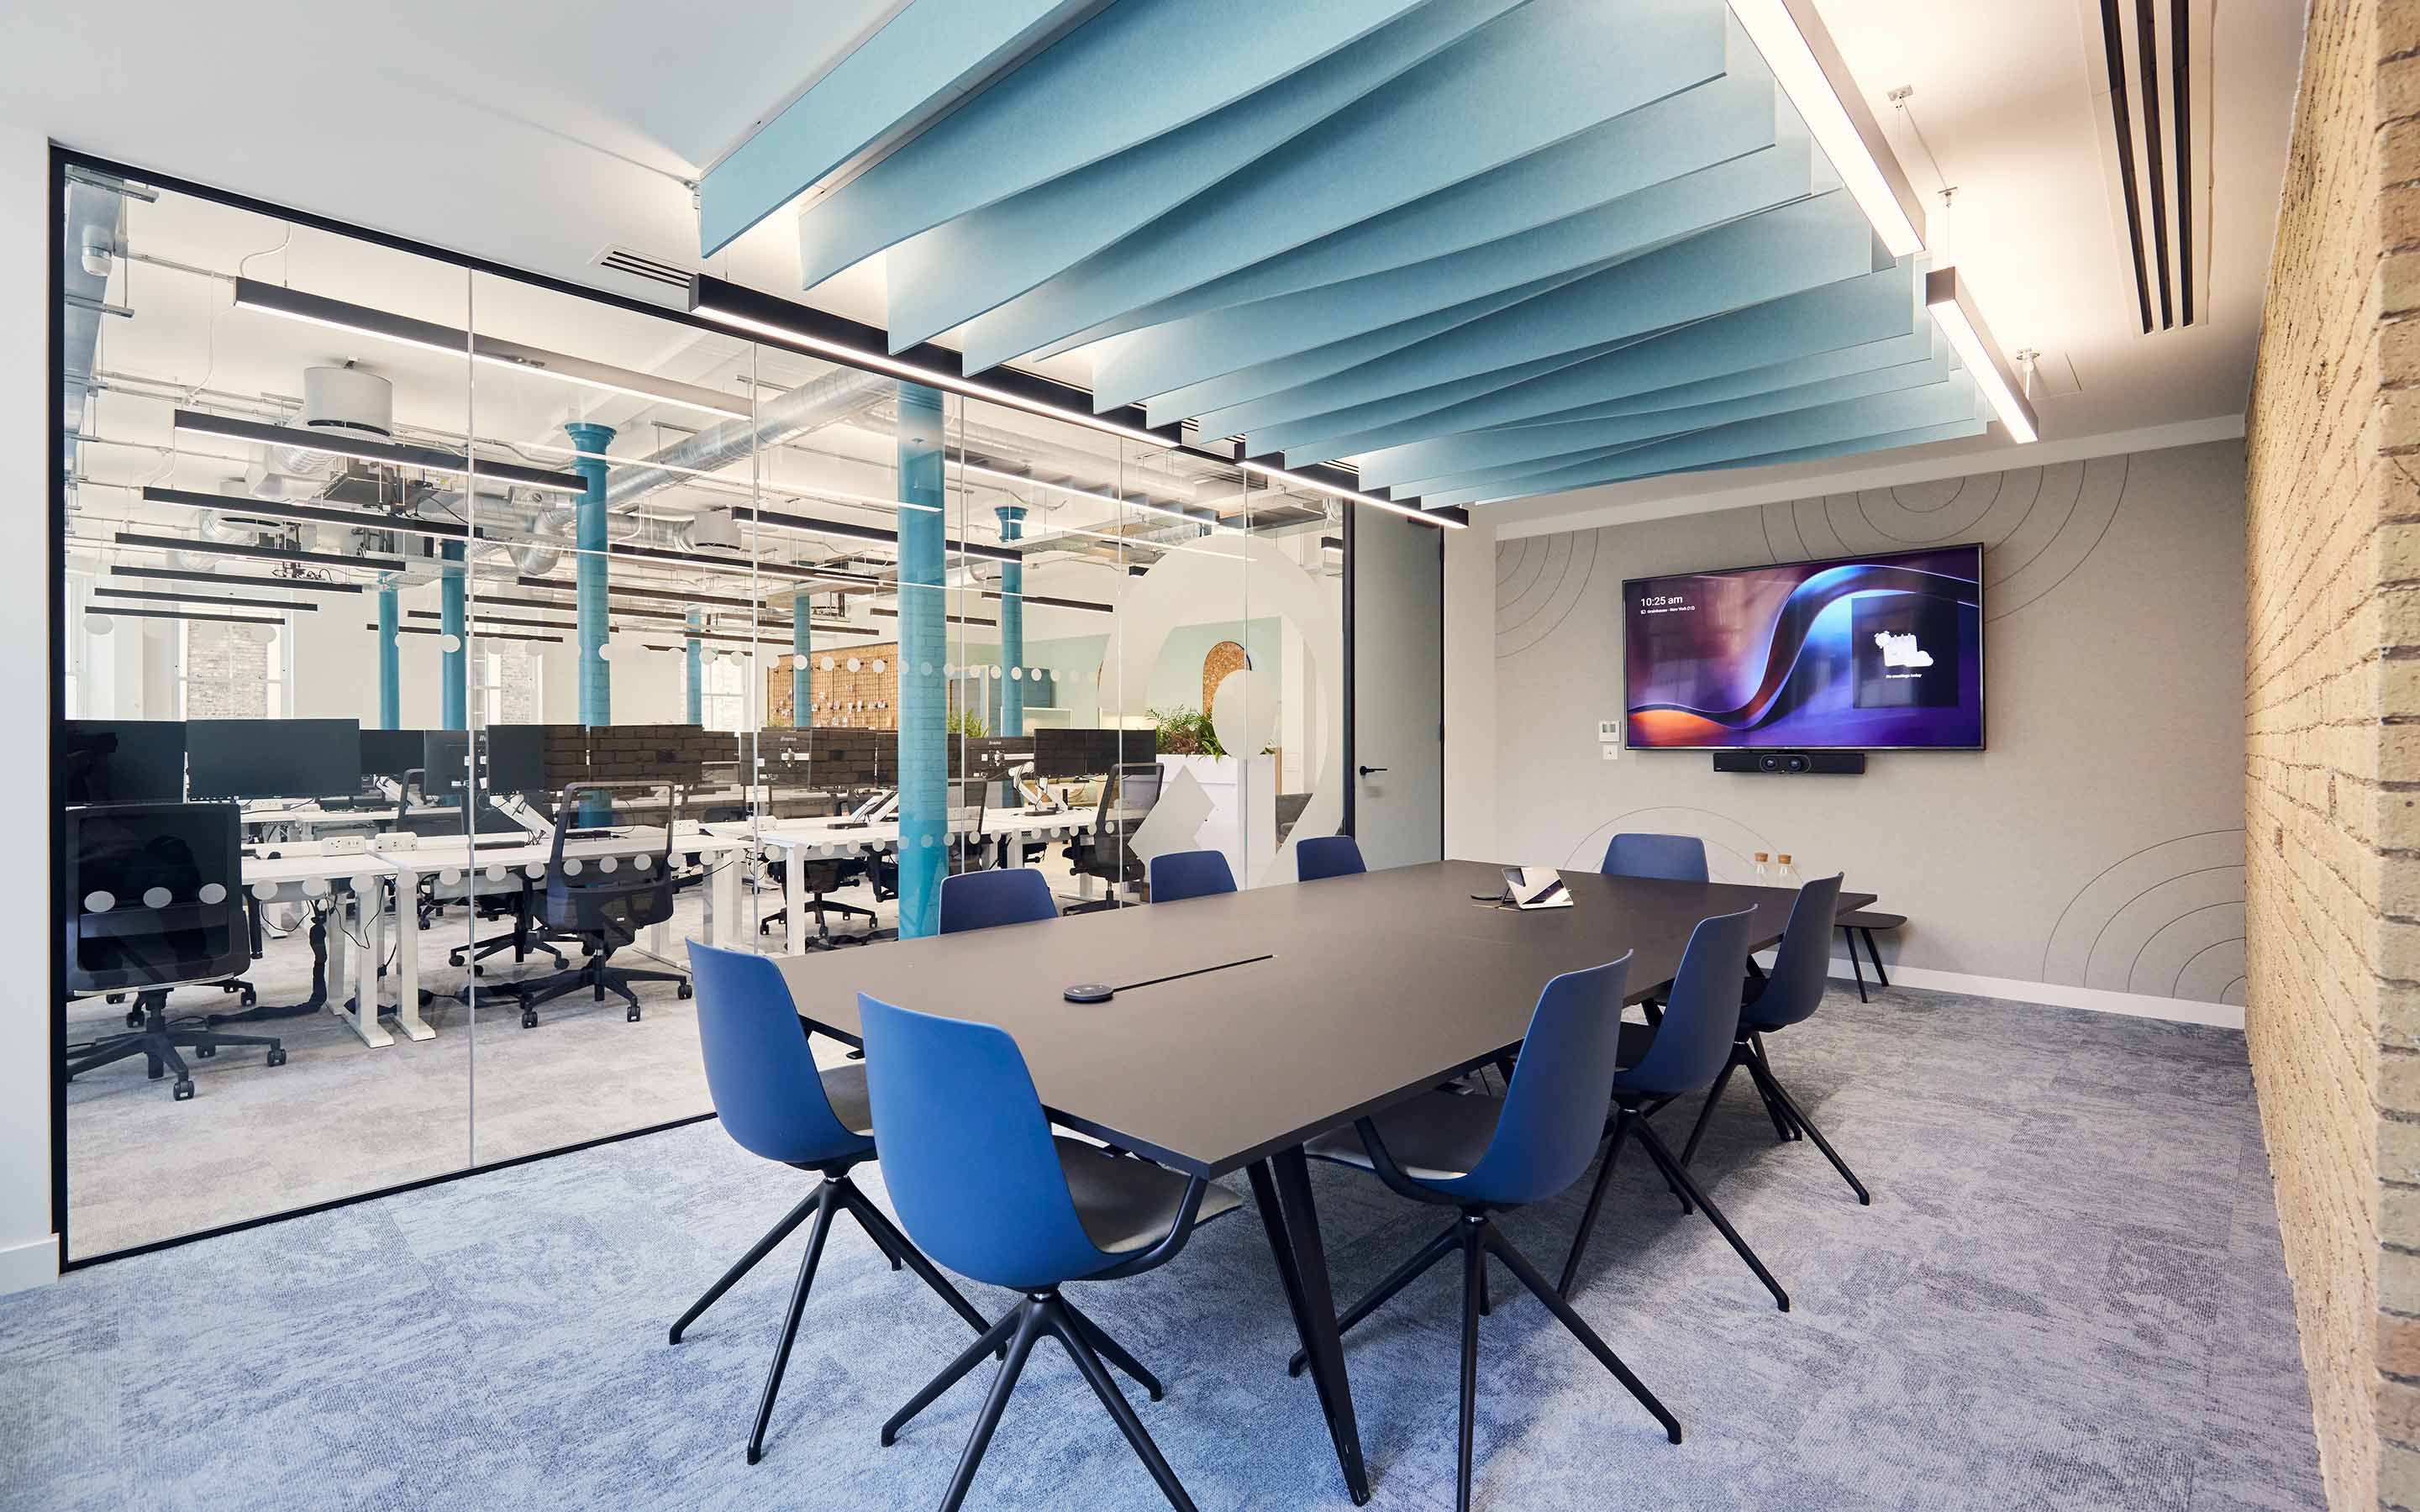 The image shows a boardroom with acoustic ceiling panels, an exposed brick wall, and views of the open-plan office beyond